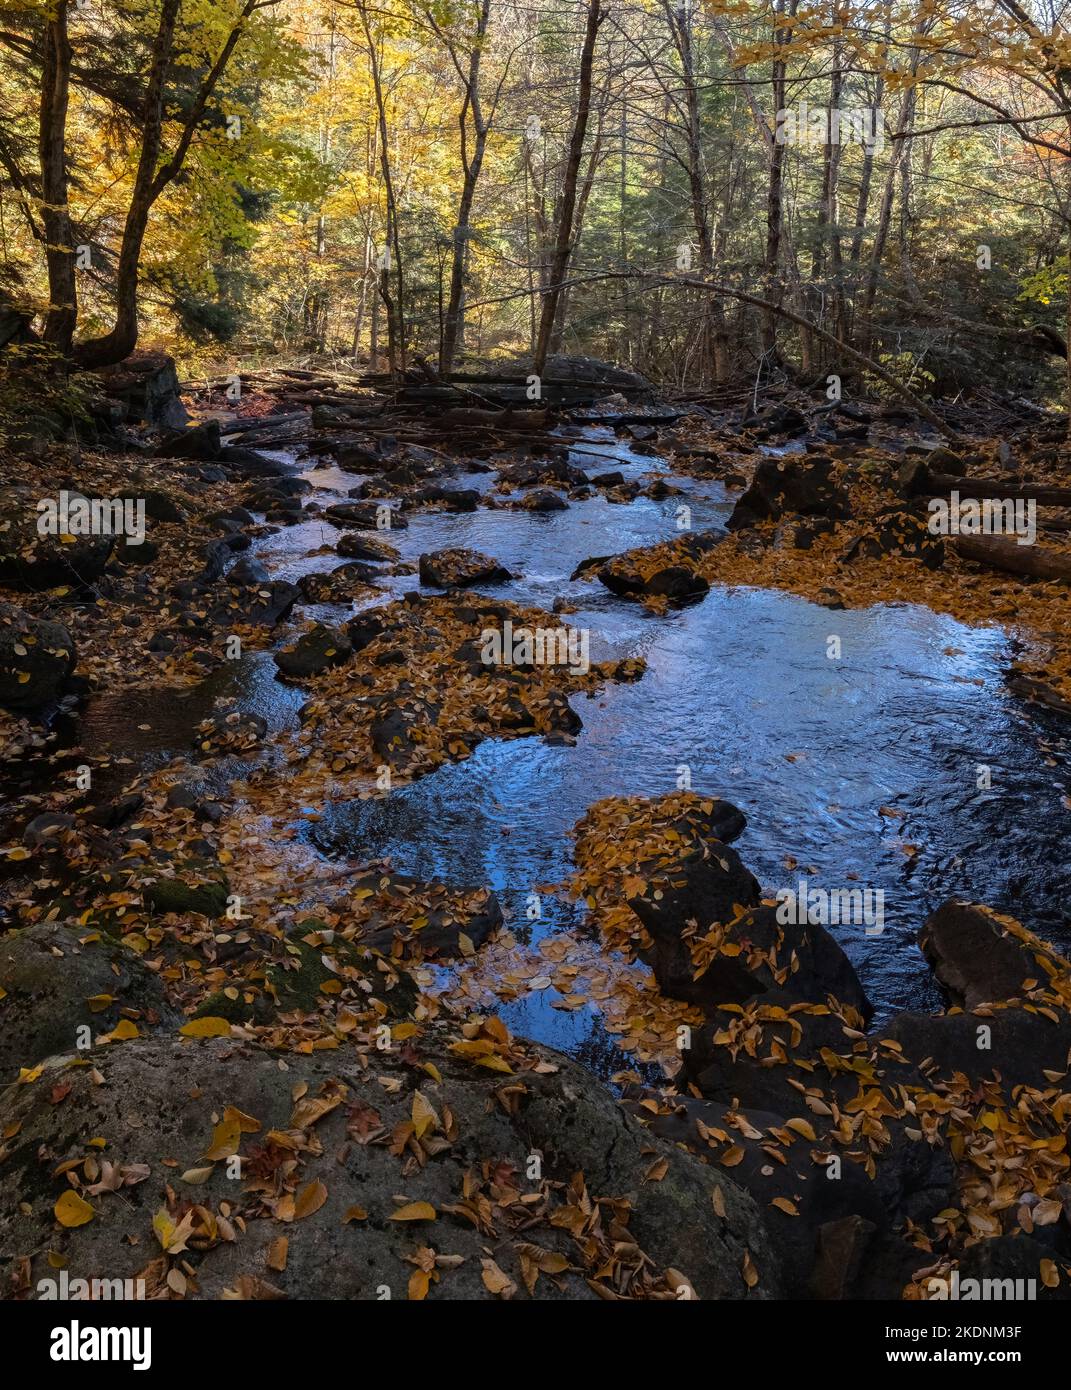 River through a forest with autumn leaves Stock Photo